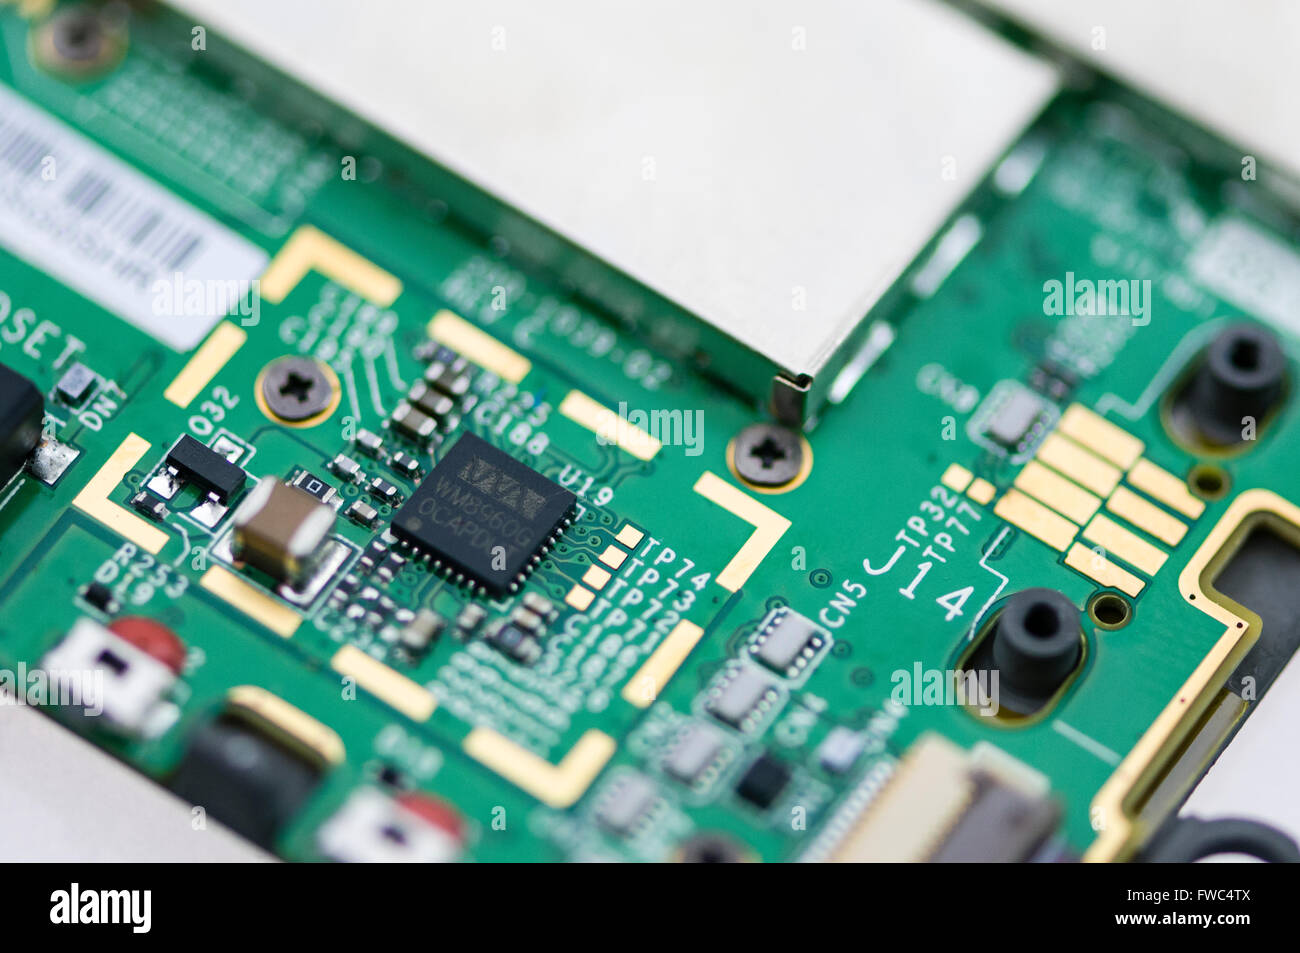 Micro components on the circuit board of a high-volume consumer electronic device. Stock Photo